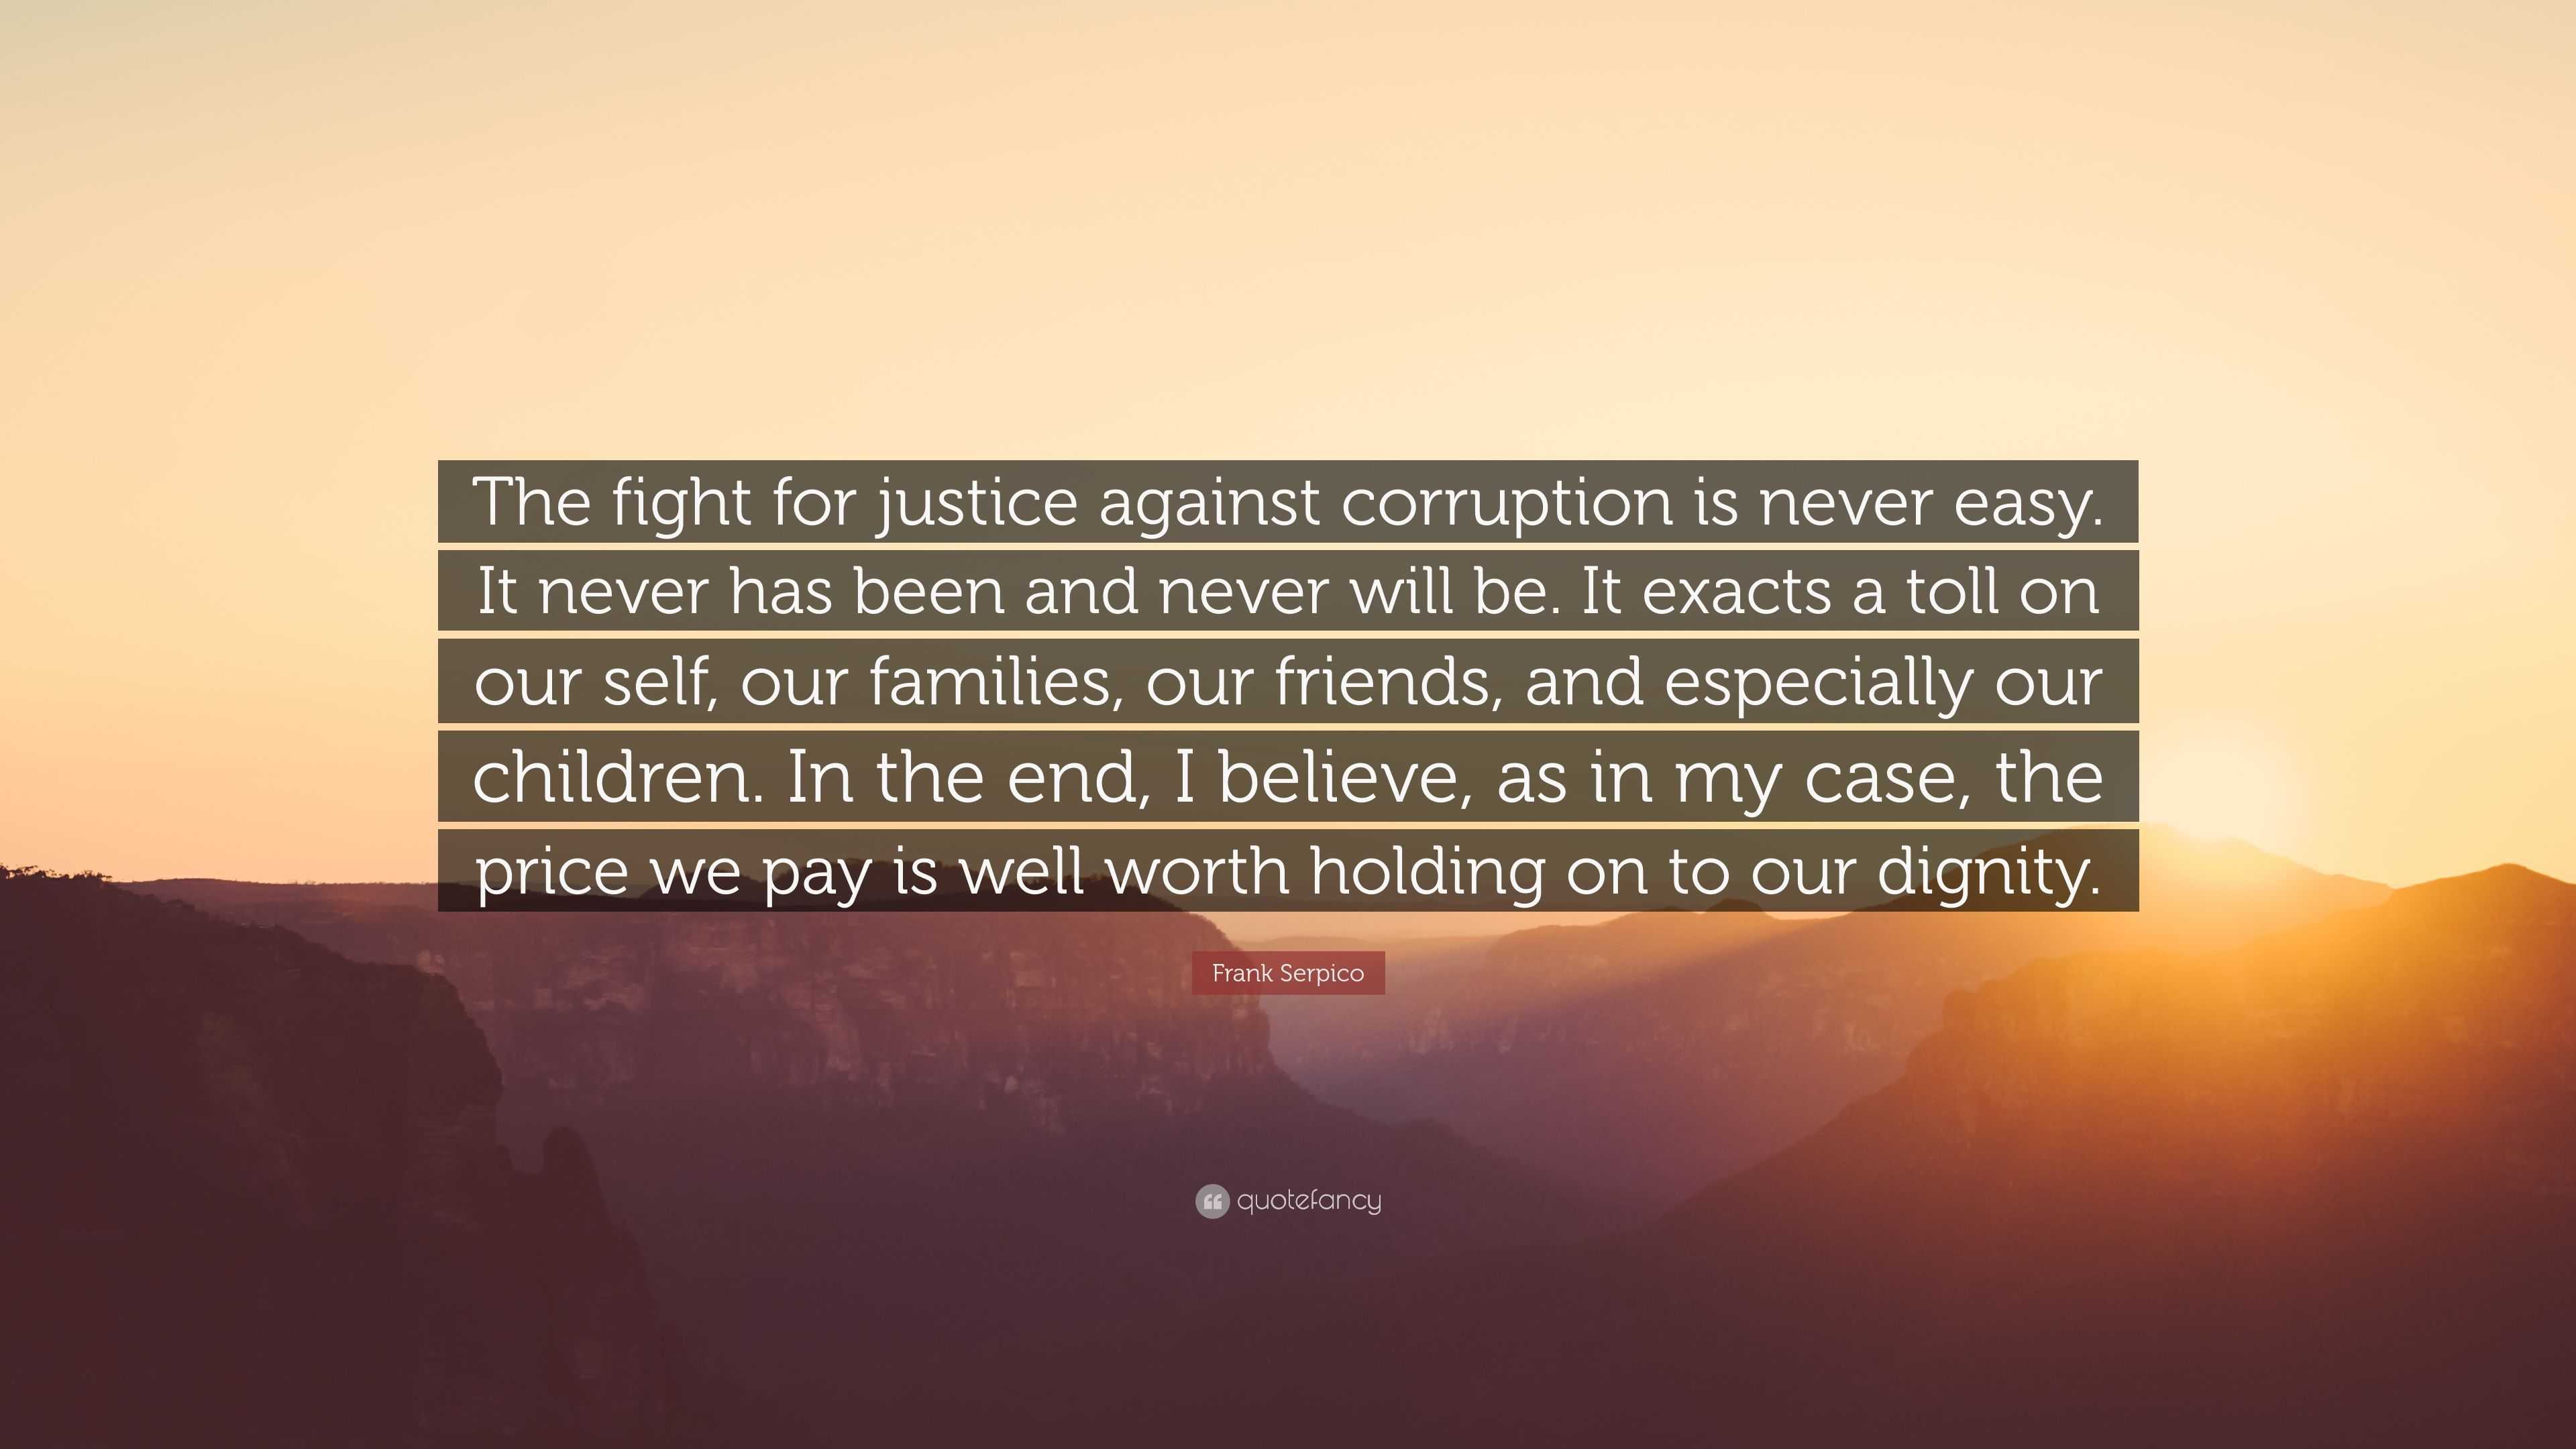 Frank Serpico Quote: “The fight for justice against corruption is never